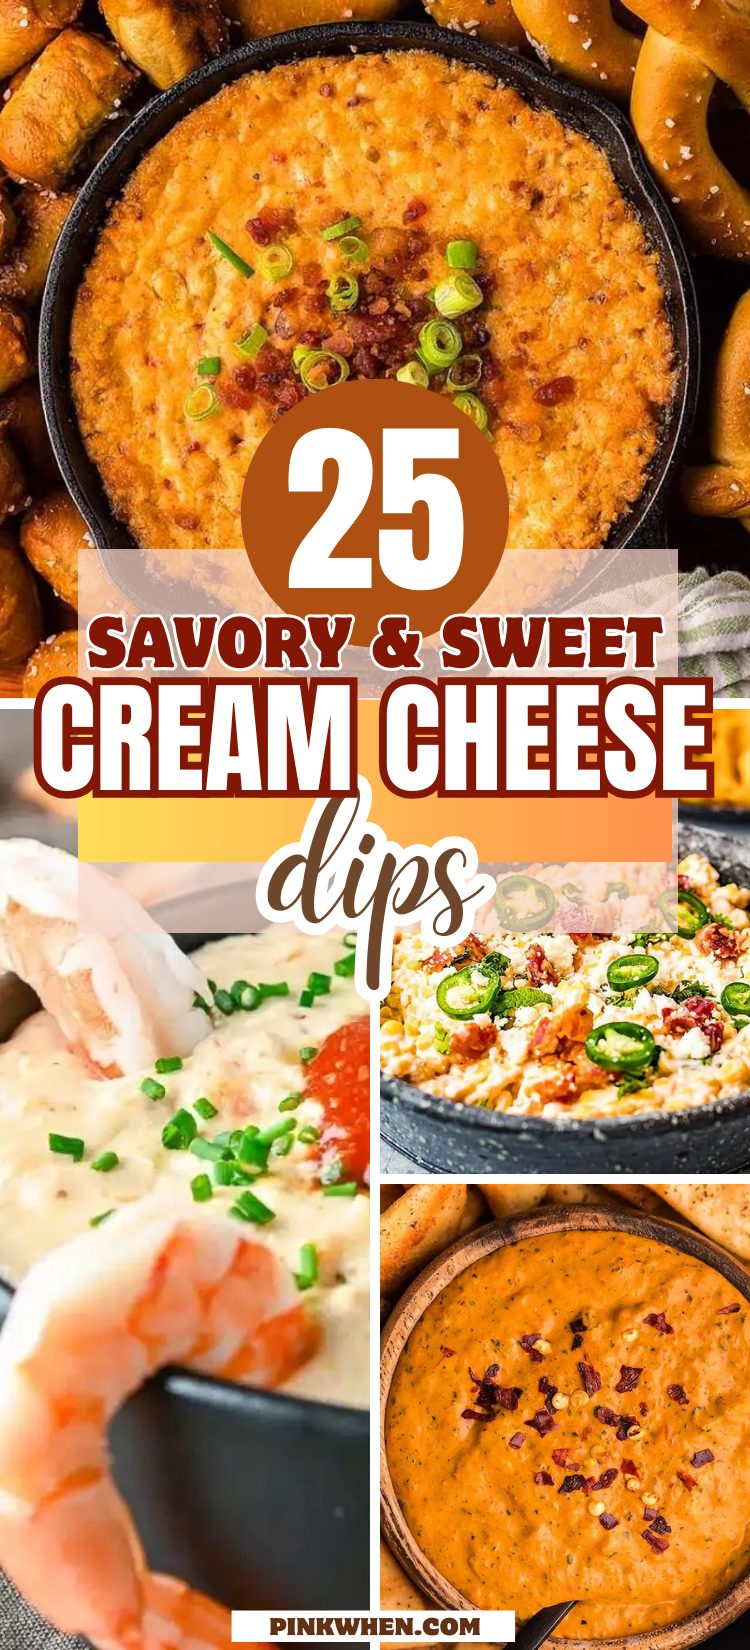 Spread the Love: 25 Savory and Sweet Cream Cheese Dips